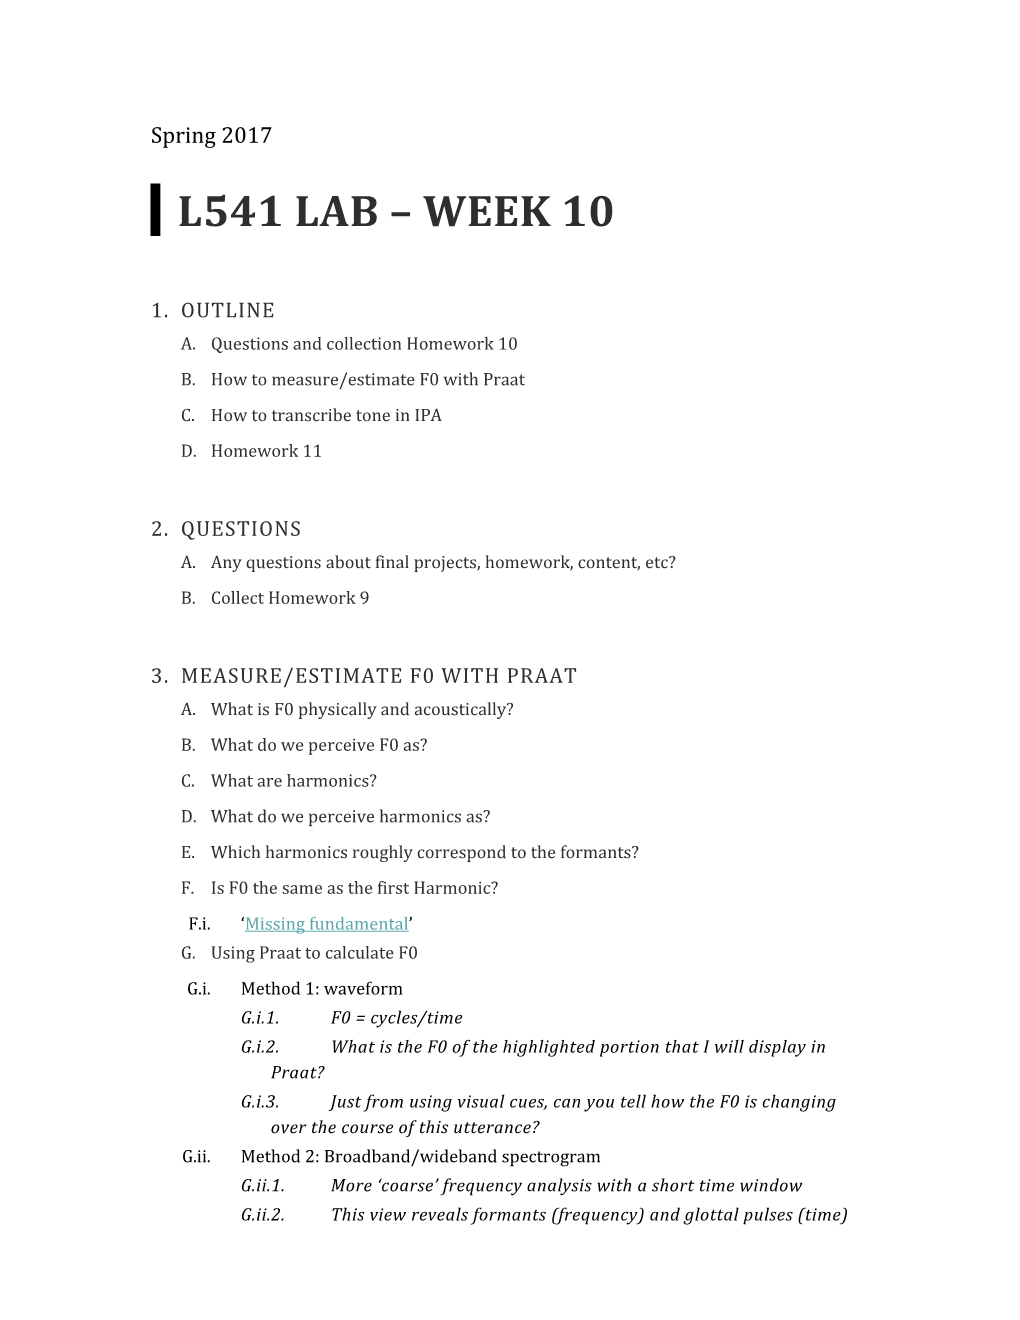 A.Questions and Collection Homework 10